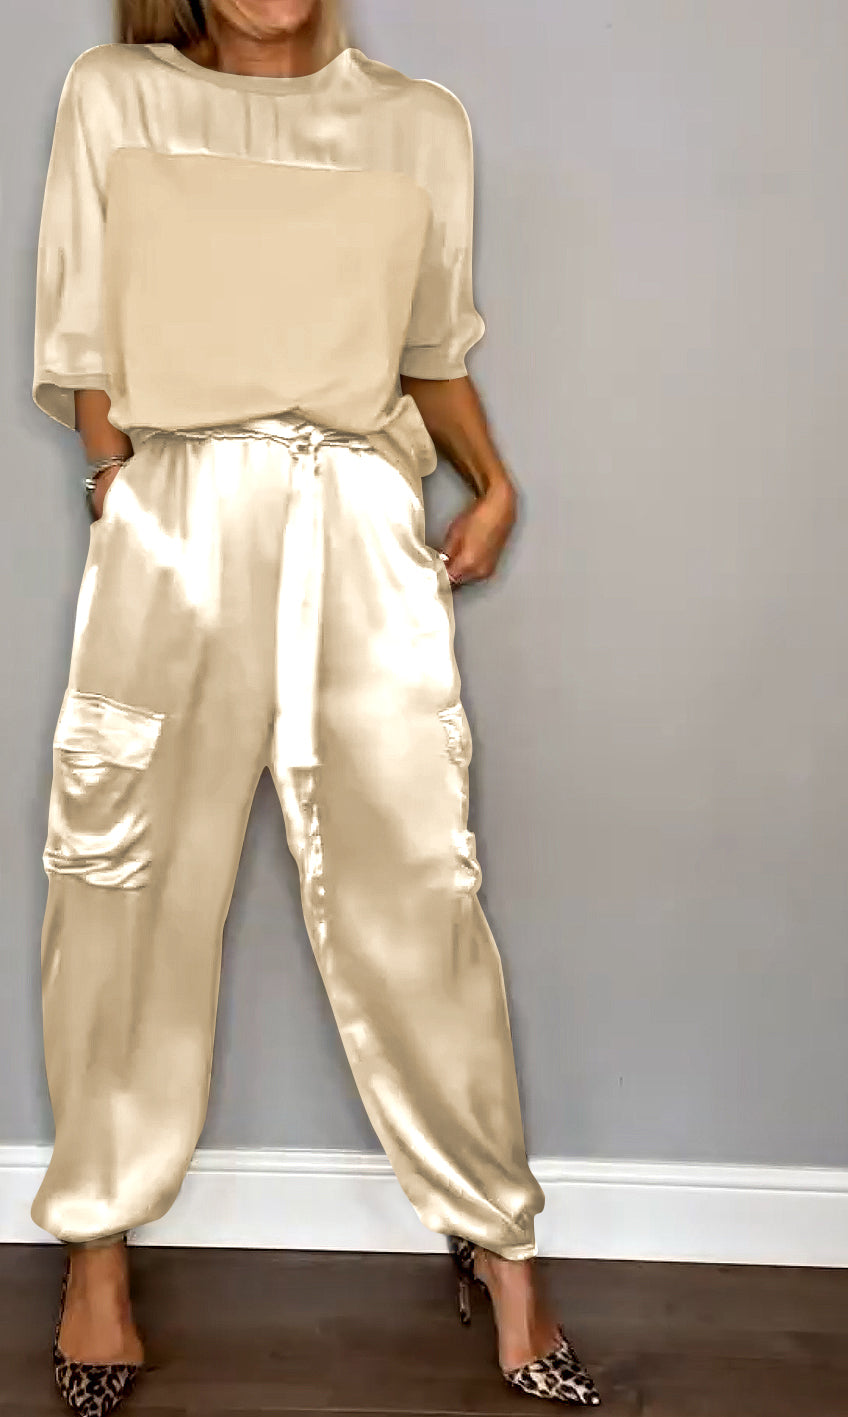 Evelyn - Satin Half-sleeved Top and Pant Suit